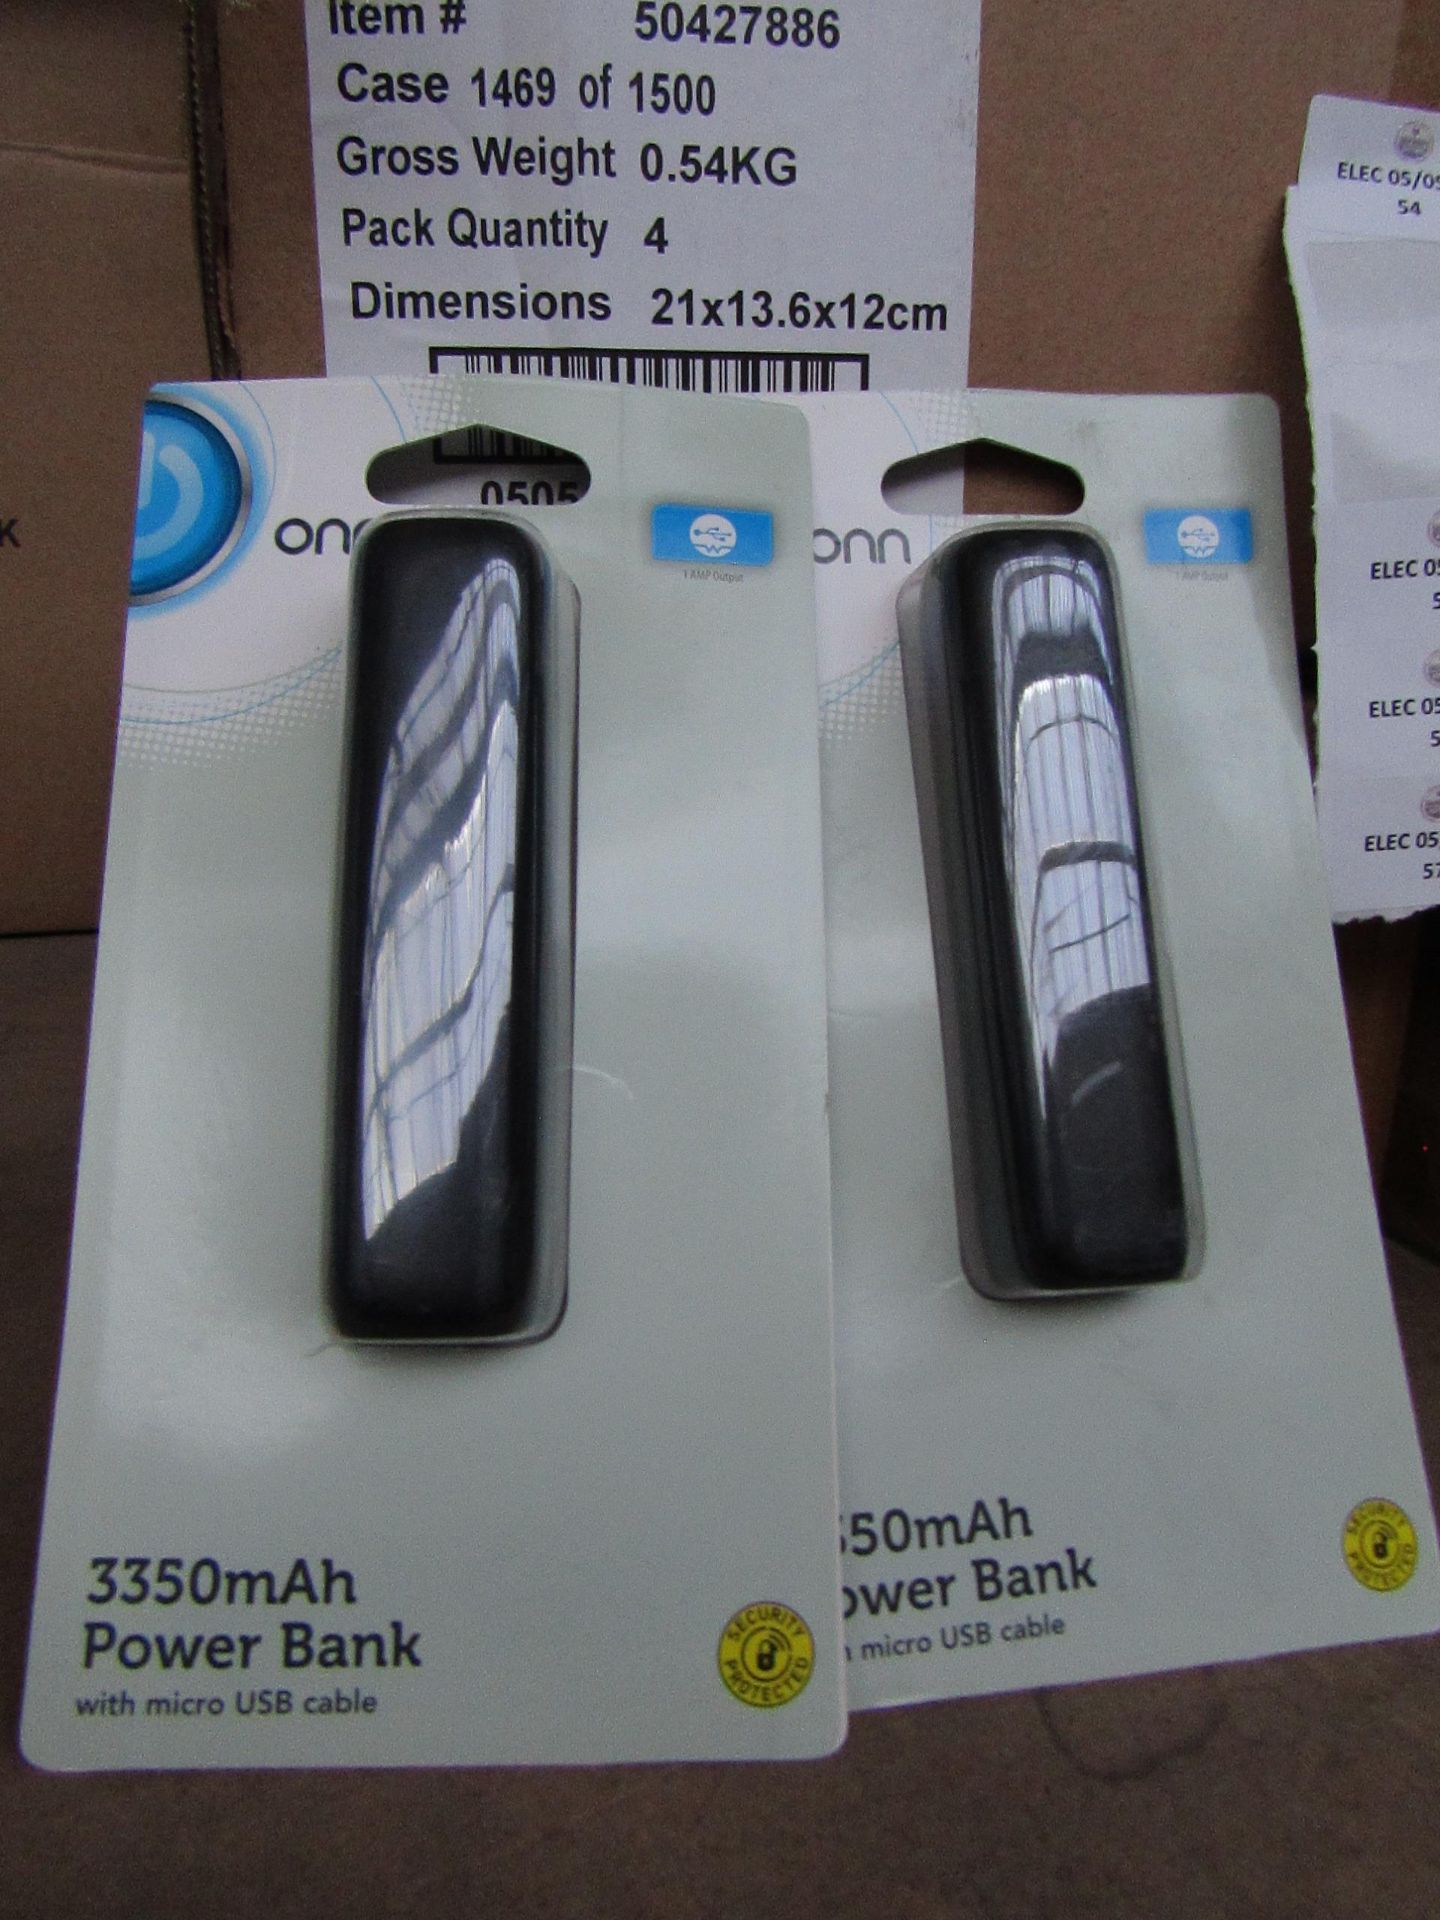 Box of 4x Onn 3350mAh power banks fro charging Phones, tabnlets etc, ideal for Holidays